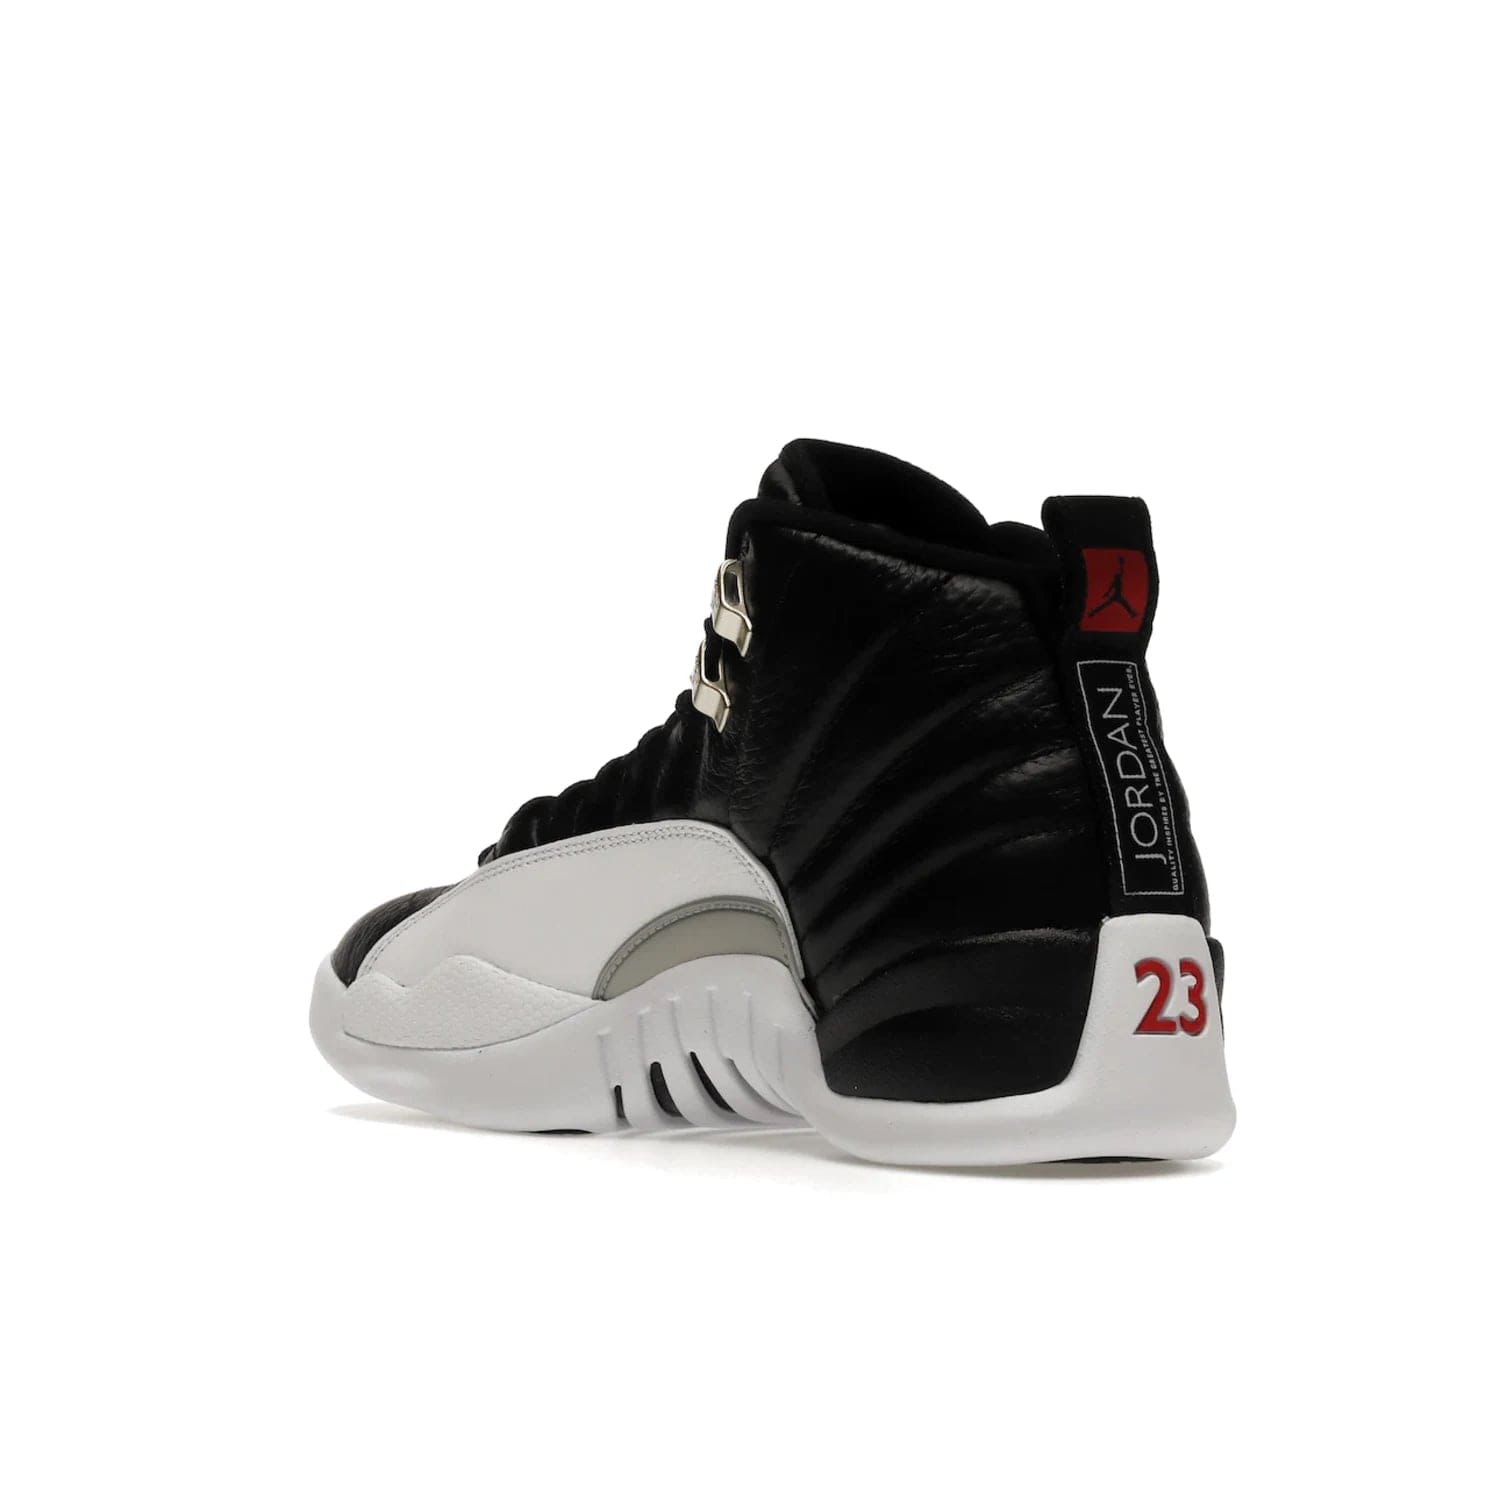 Jordan 12 Retro Playoffs (2022) - Image 24 - Only at www.BallersClubKickz.com - Retro Air Jordan 12 Playoffs. Celebrate 25 years with MJ's iconic shoe. Black tumbled leather upper, white sole with carbon fiber detailing and Jumpman embroidery. Must-have for any Jordan shoe fan. Releases March 2022.